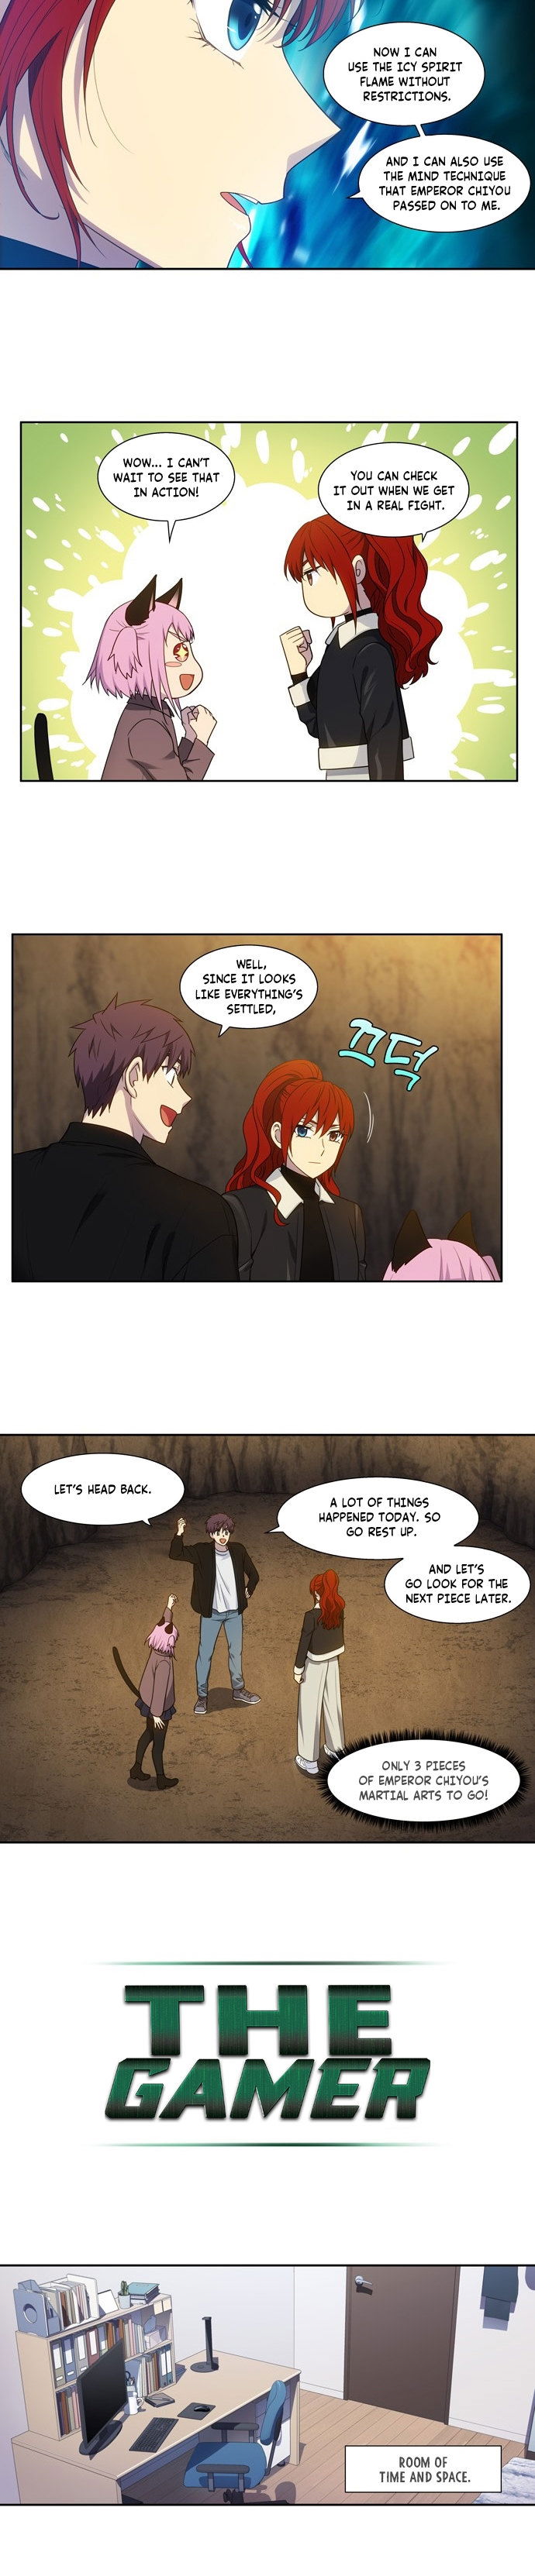 the-gamer-chap-413-5